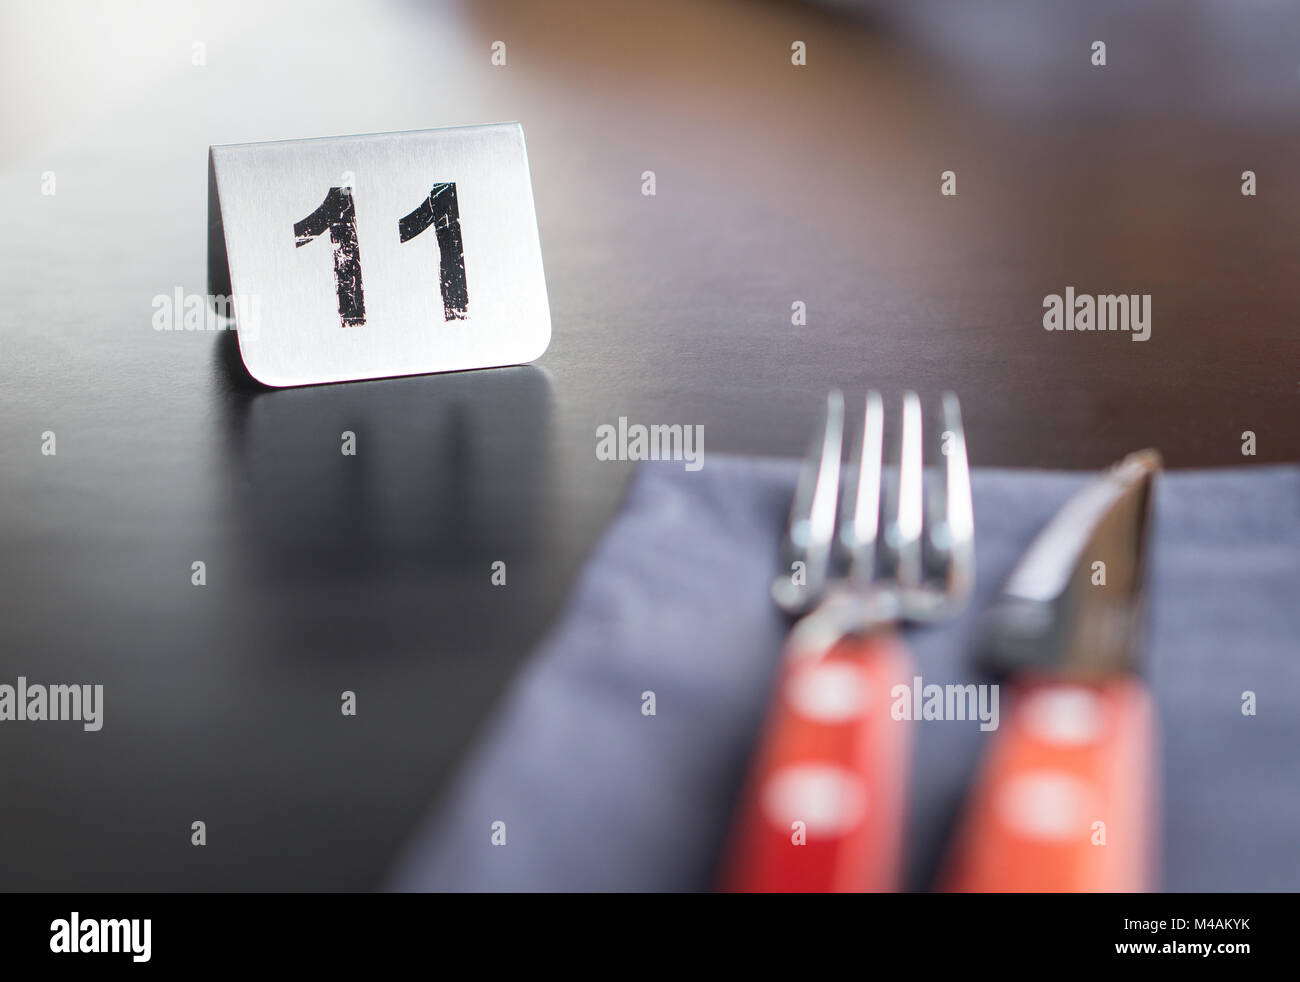 Number sign on restaurant table to show reservation. Utensils, fork and knife in the front. Customer waiting for service or food. Stock Photo